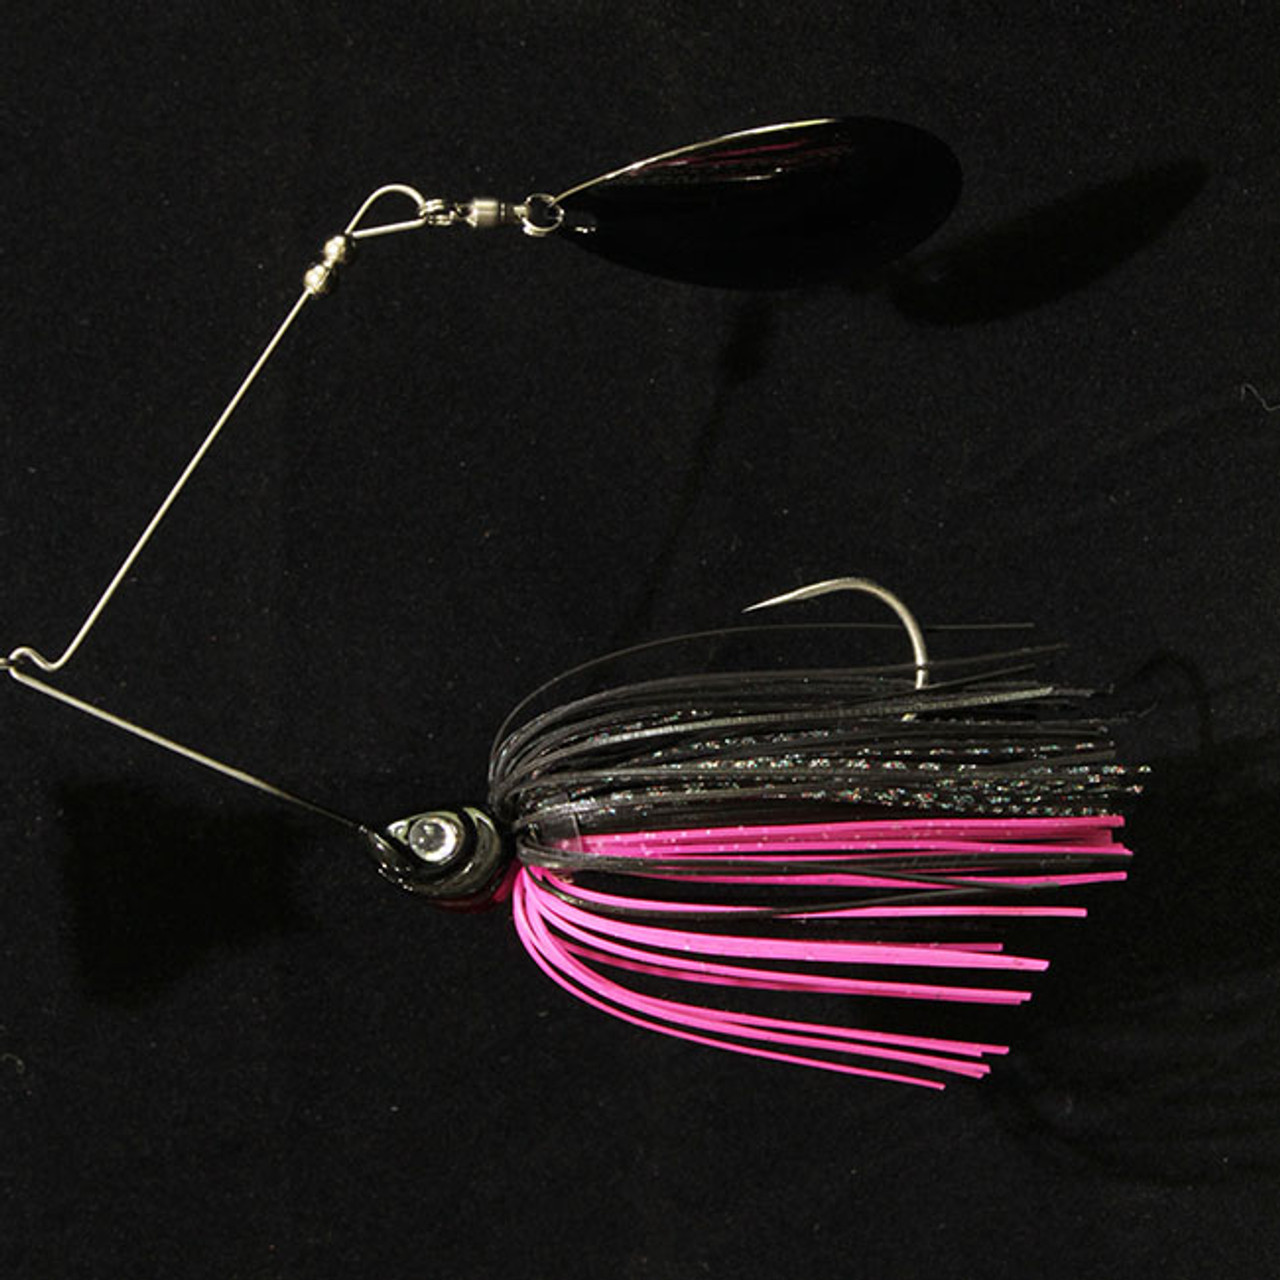 Night Spins™ Nighttime Spinnerbait For Bass Fishing